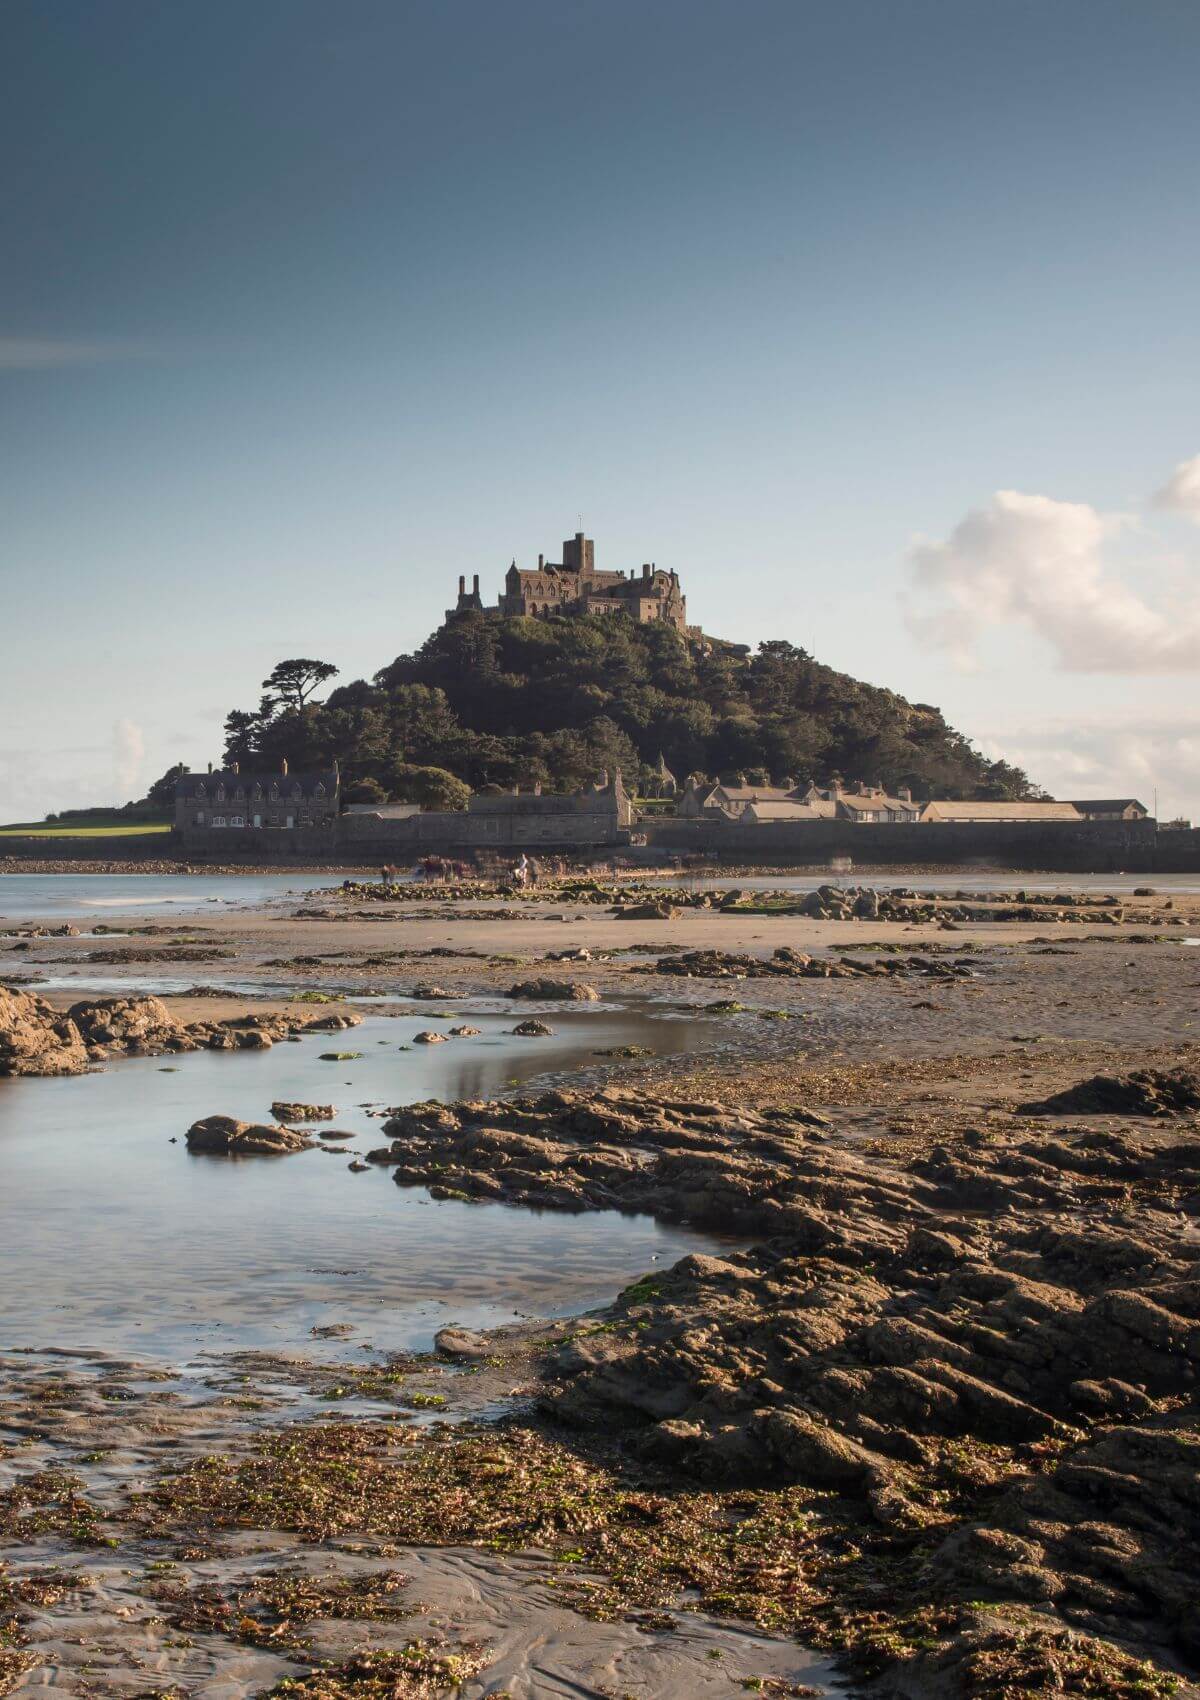 The castle in England on St Michael’s Mount